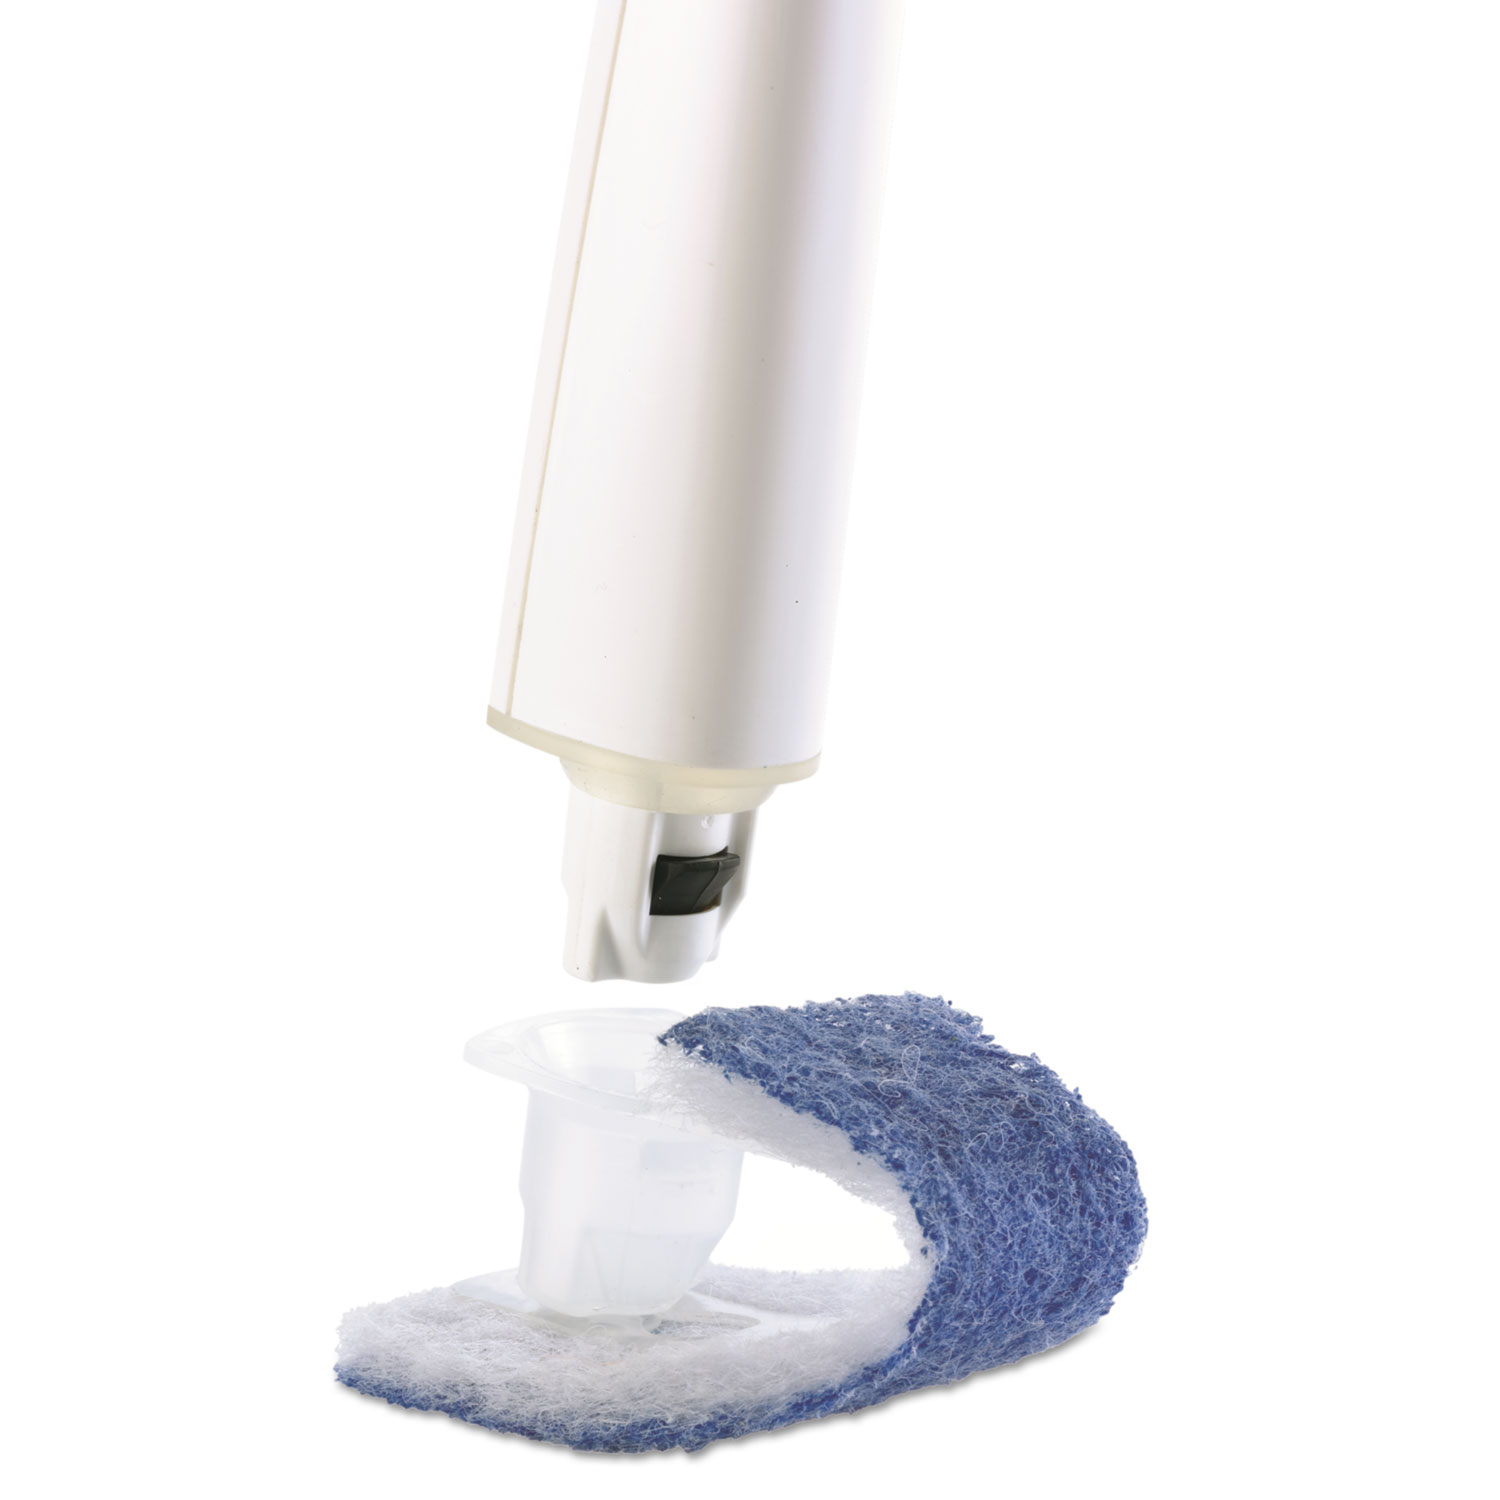 Toilet Scrubber Starter Kit, 1 Handle and 5 Scrubbers